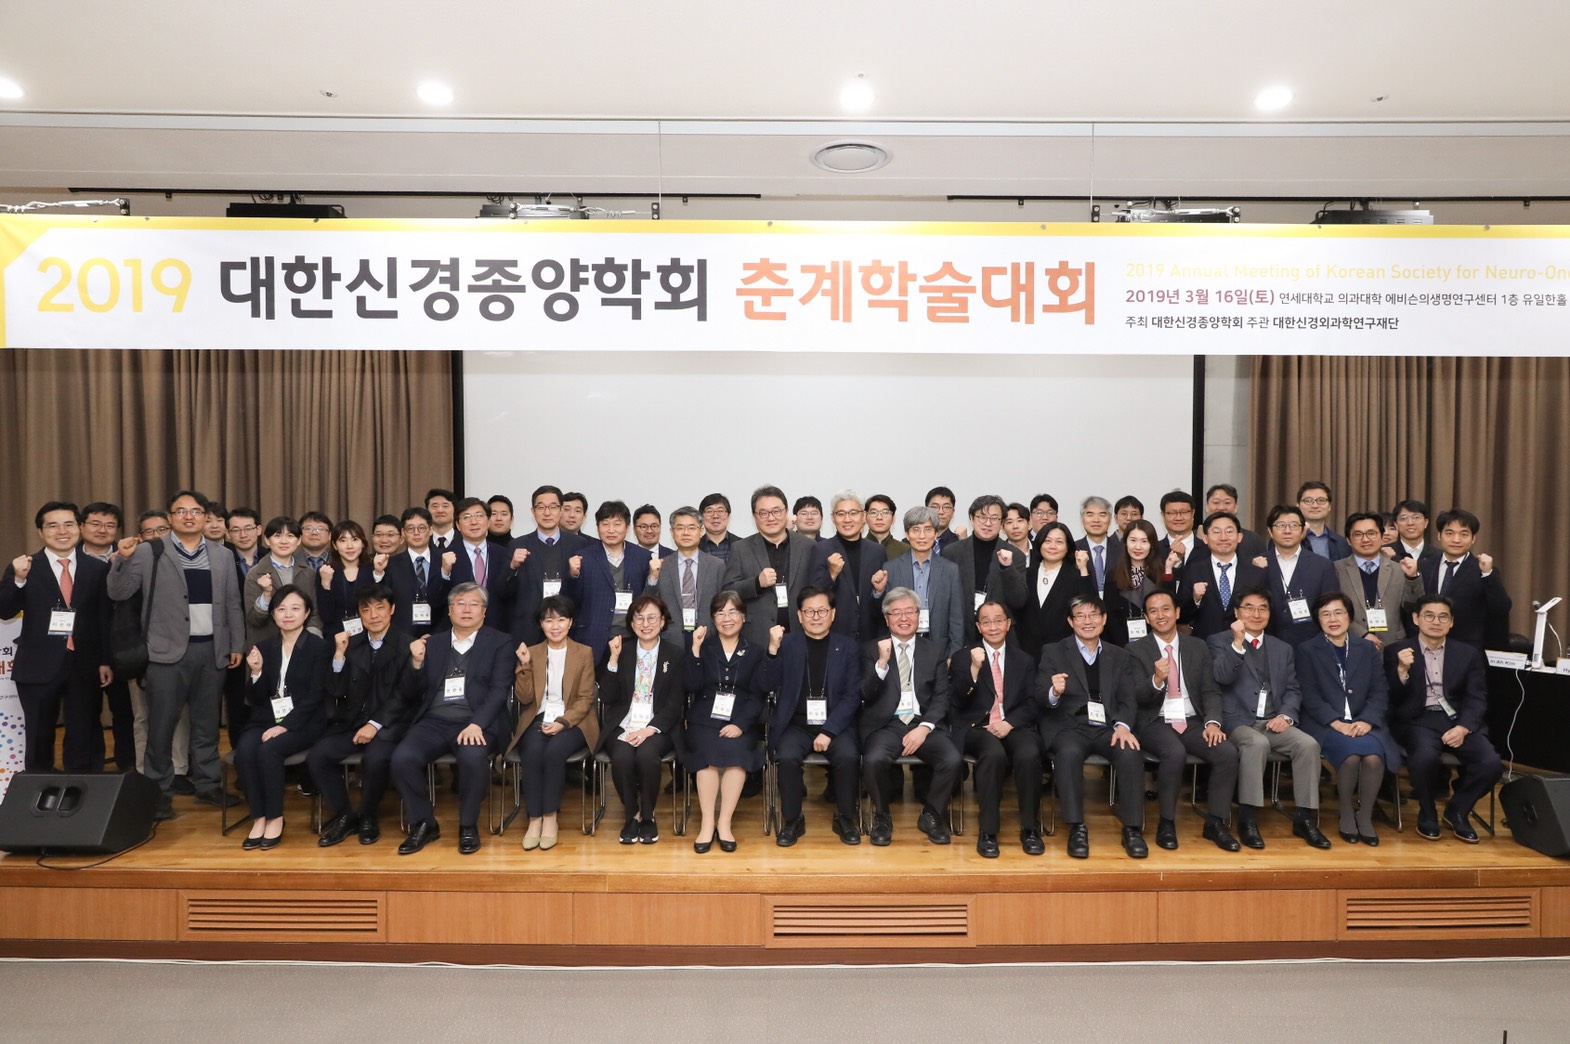 Siriraj Faculty Deliver a Special Lecture at 2019 KSNO Annual Meeting, South Korea